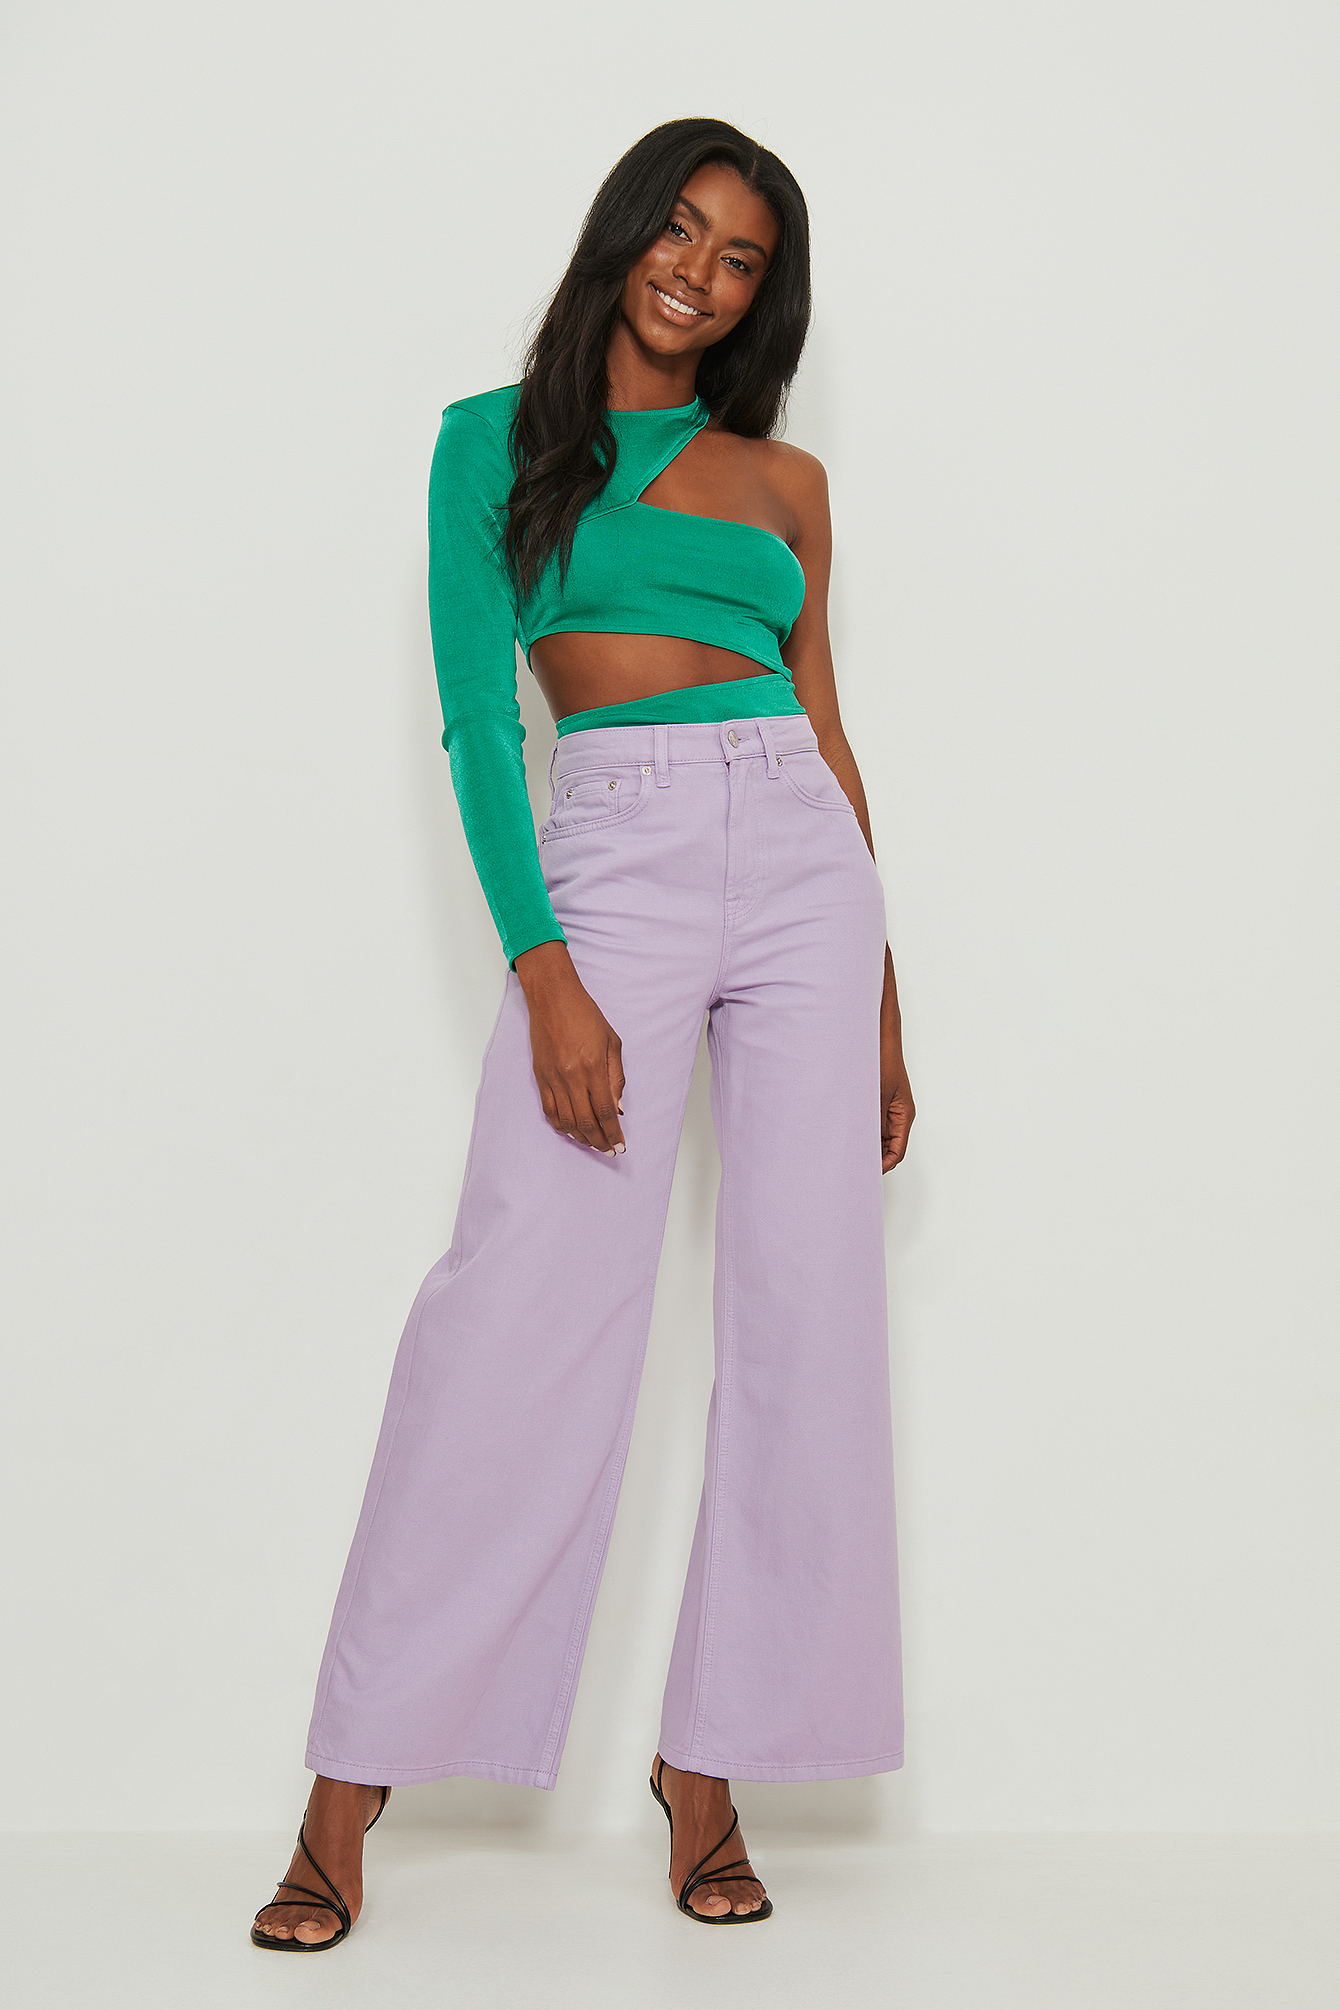 Cut Out Jersey Crop Top Outfit